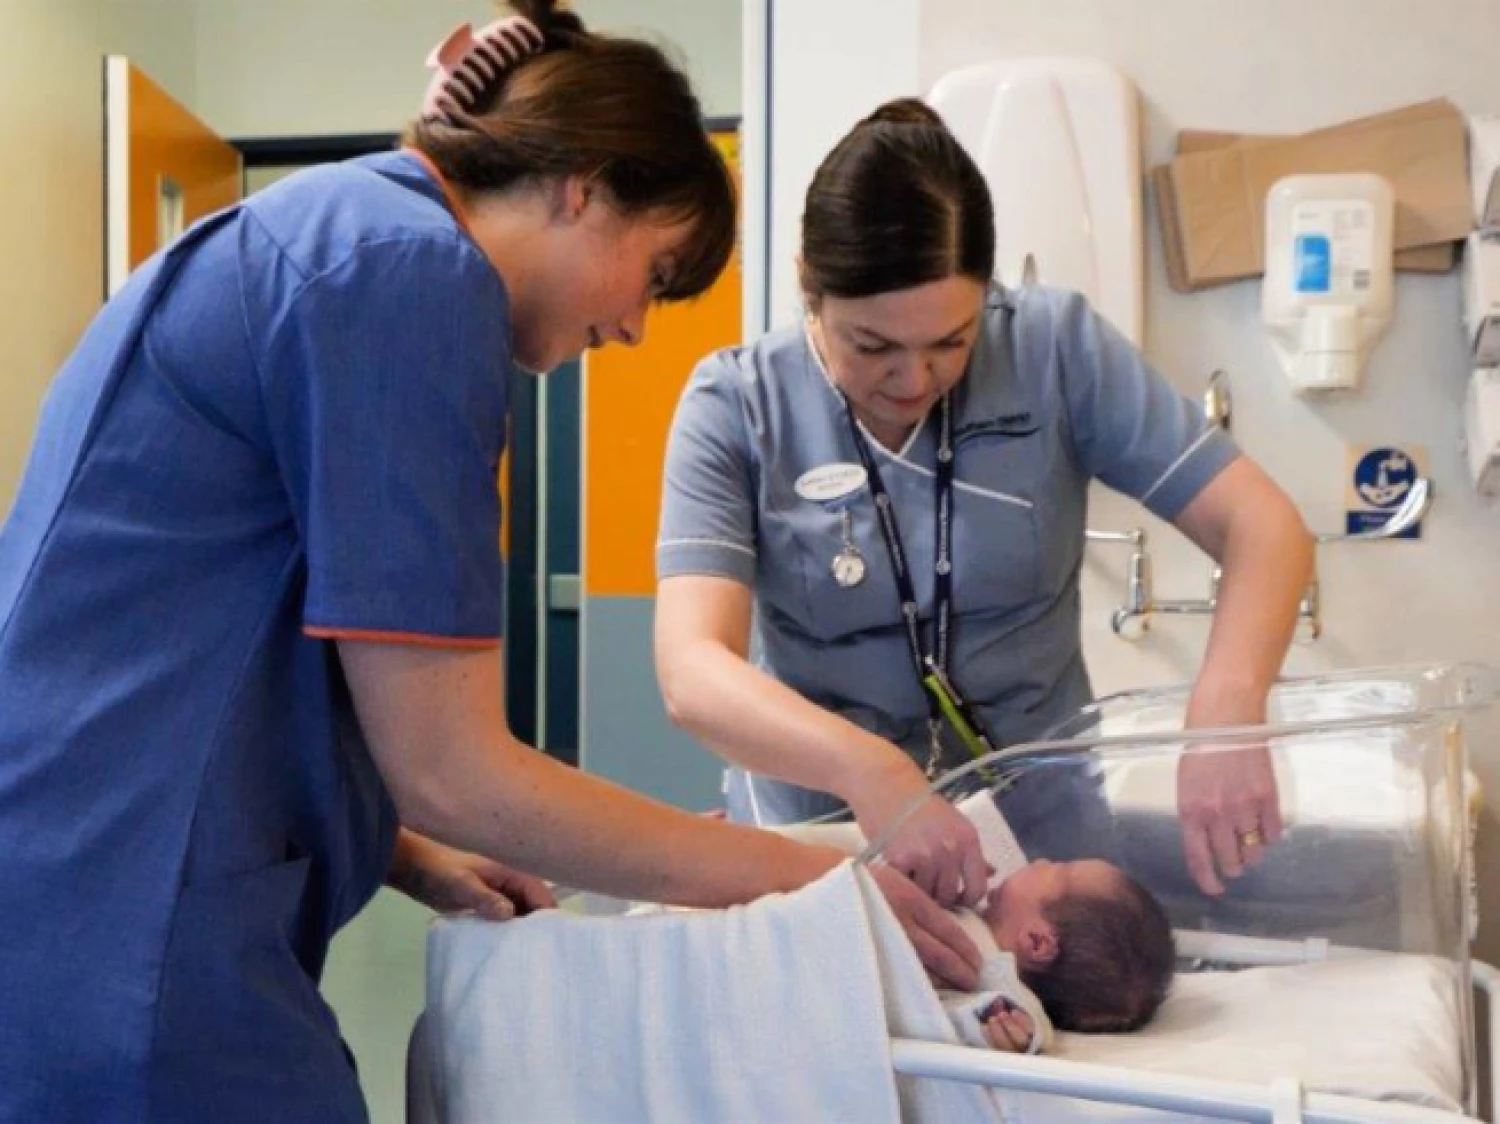 A midwife and a paediatric nurse conducting a regular health check on a newborn baby in the maternity ward.